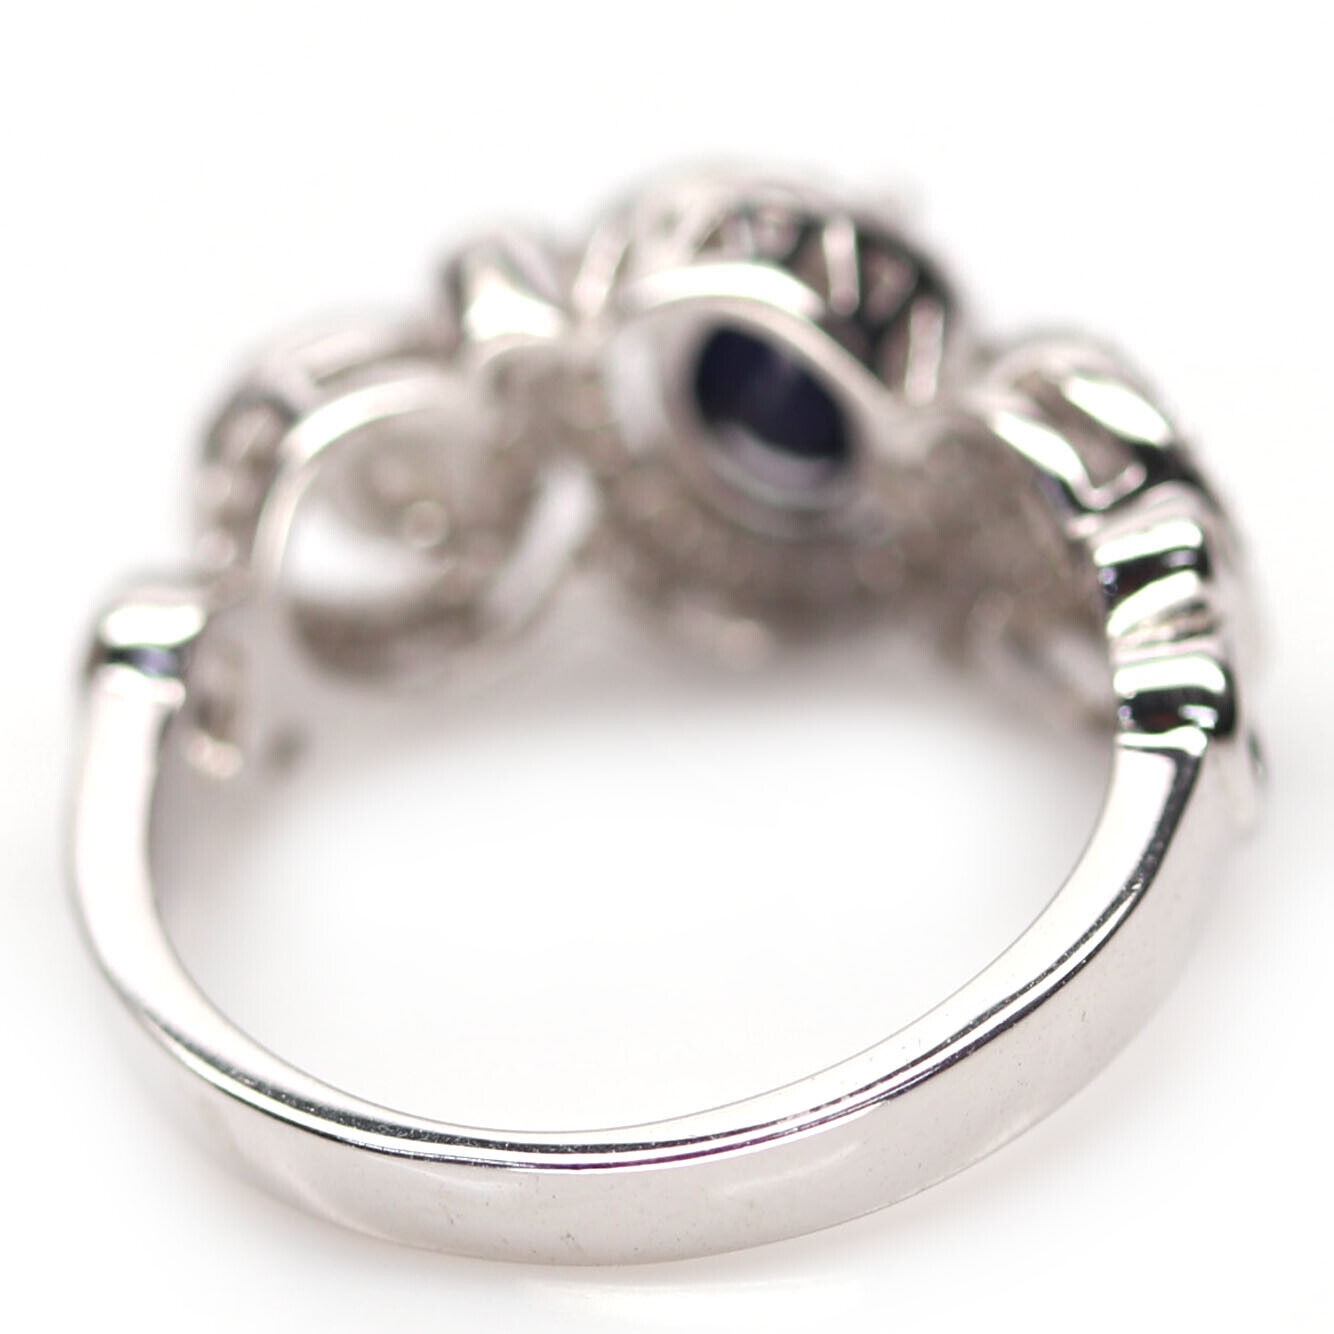 A 925 silver ring set with oval cut sapphire and white stones, (N). - Image 3 of 3